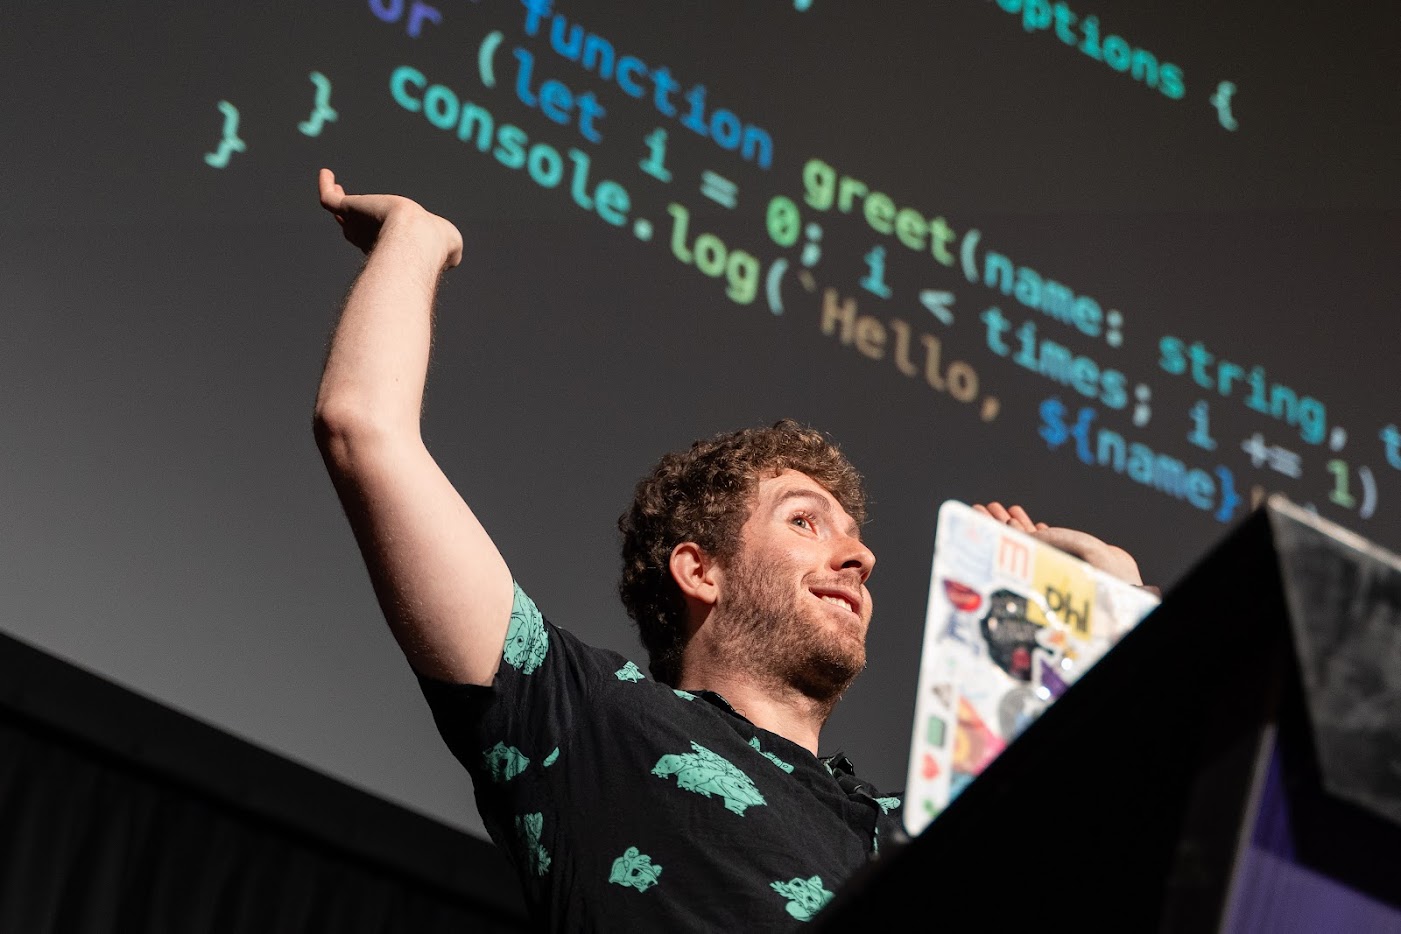 Me raising hands happily while giving a talk on stage, with code projected behind me